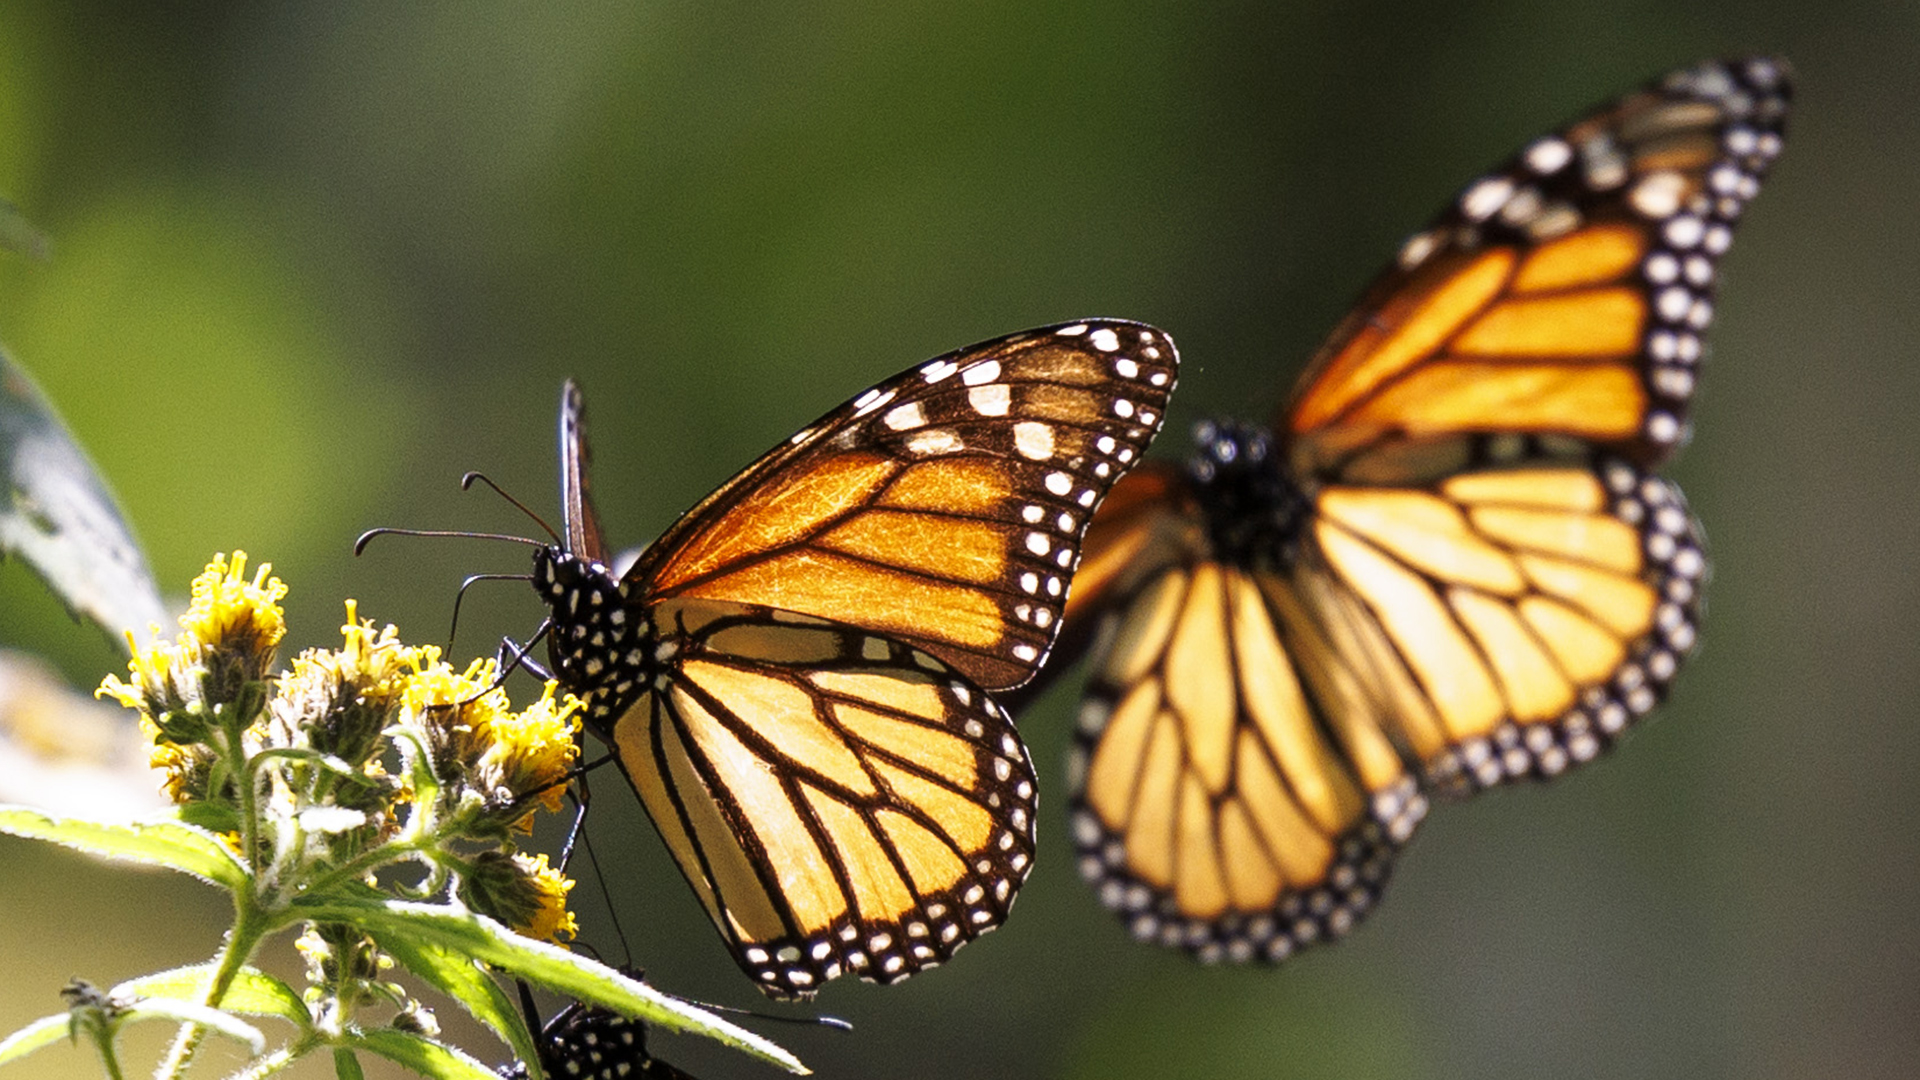 After their 3,000 mile migration from Canada to the highlands of Mexico, monarch butterflies feed on flowers at Piedra Herrada.